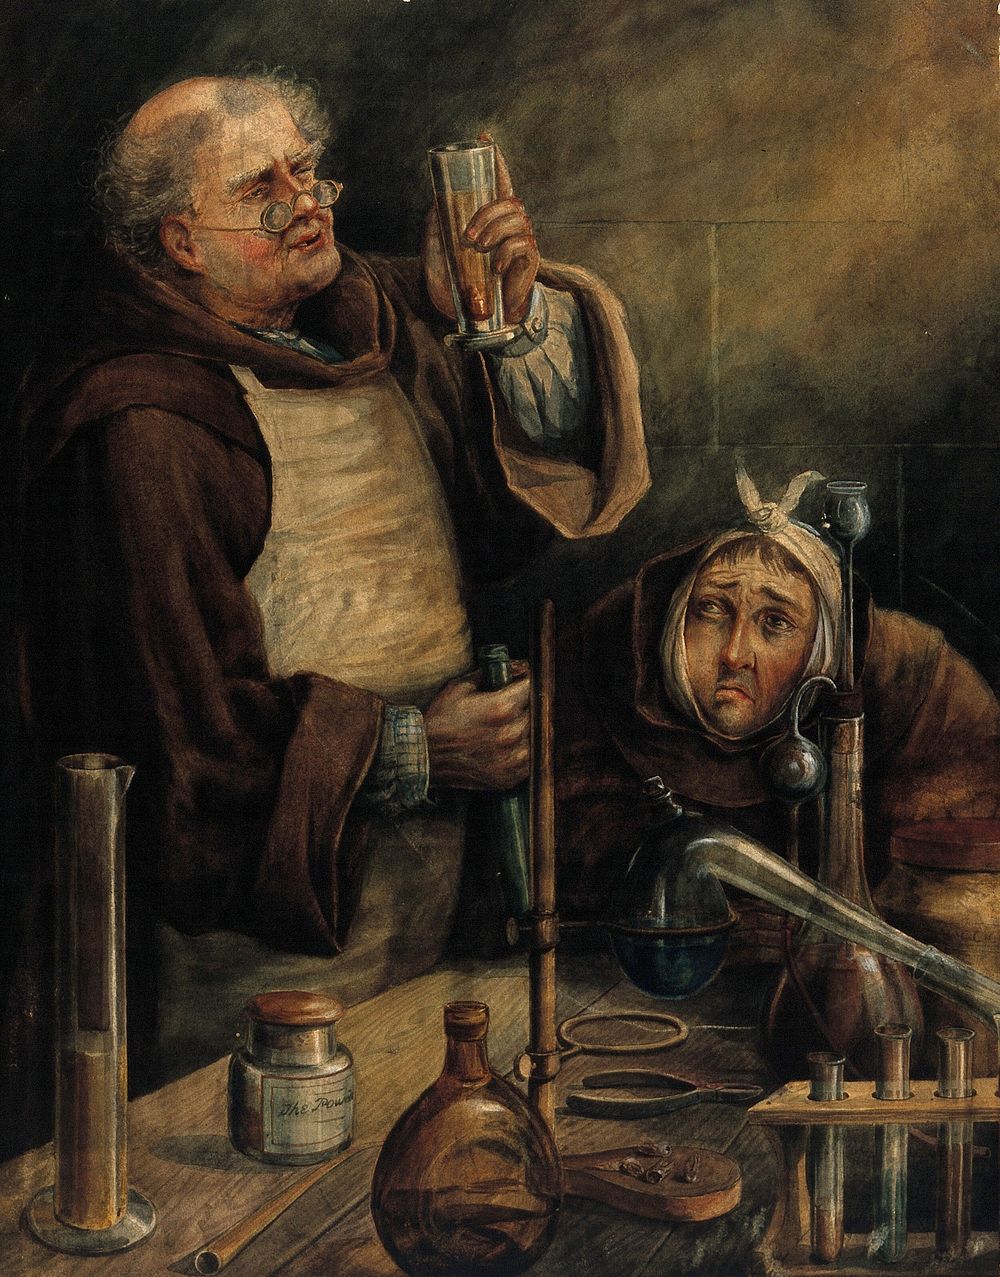 Two monks in a laboratory trying to find a remedy for one monk's toothache. Watercolour by J. Gregory, 1896.